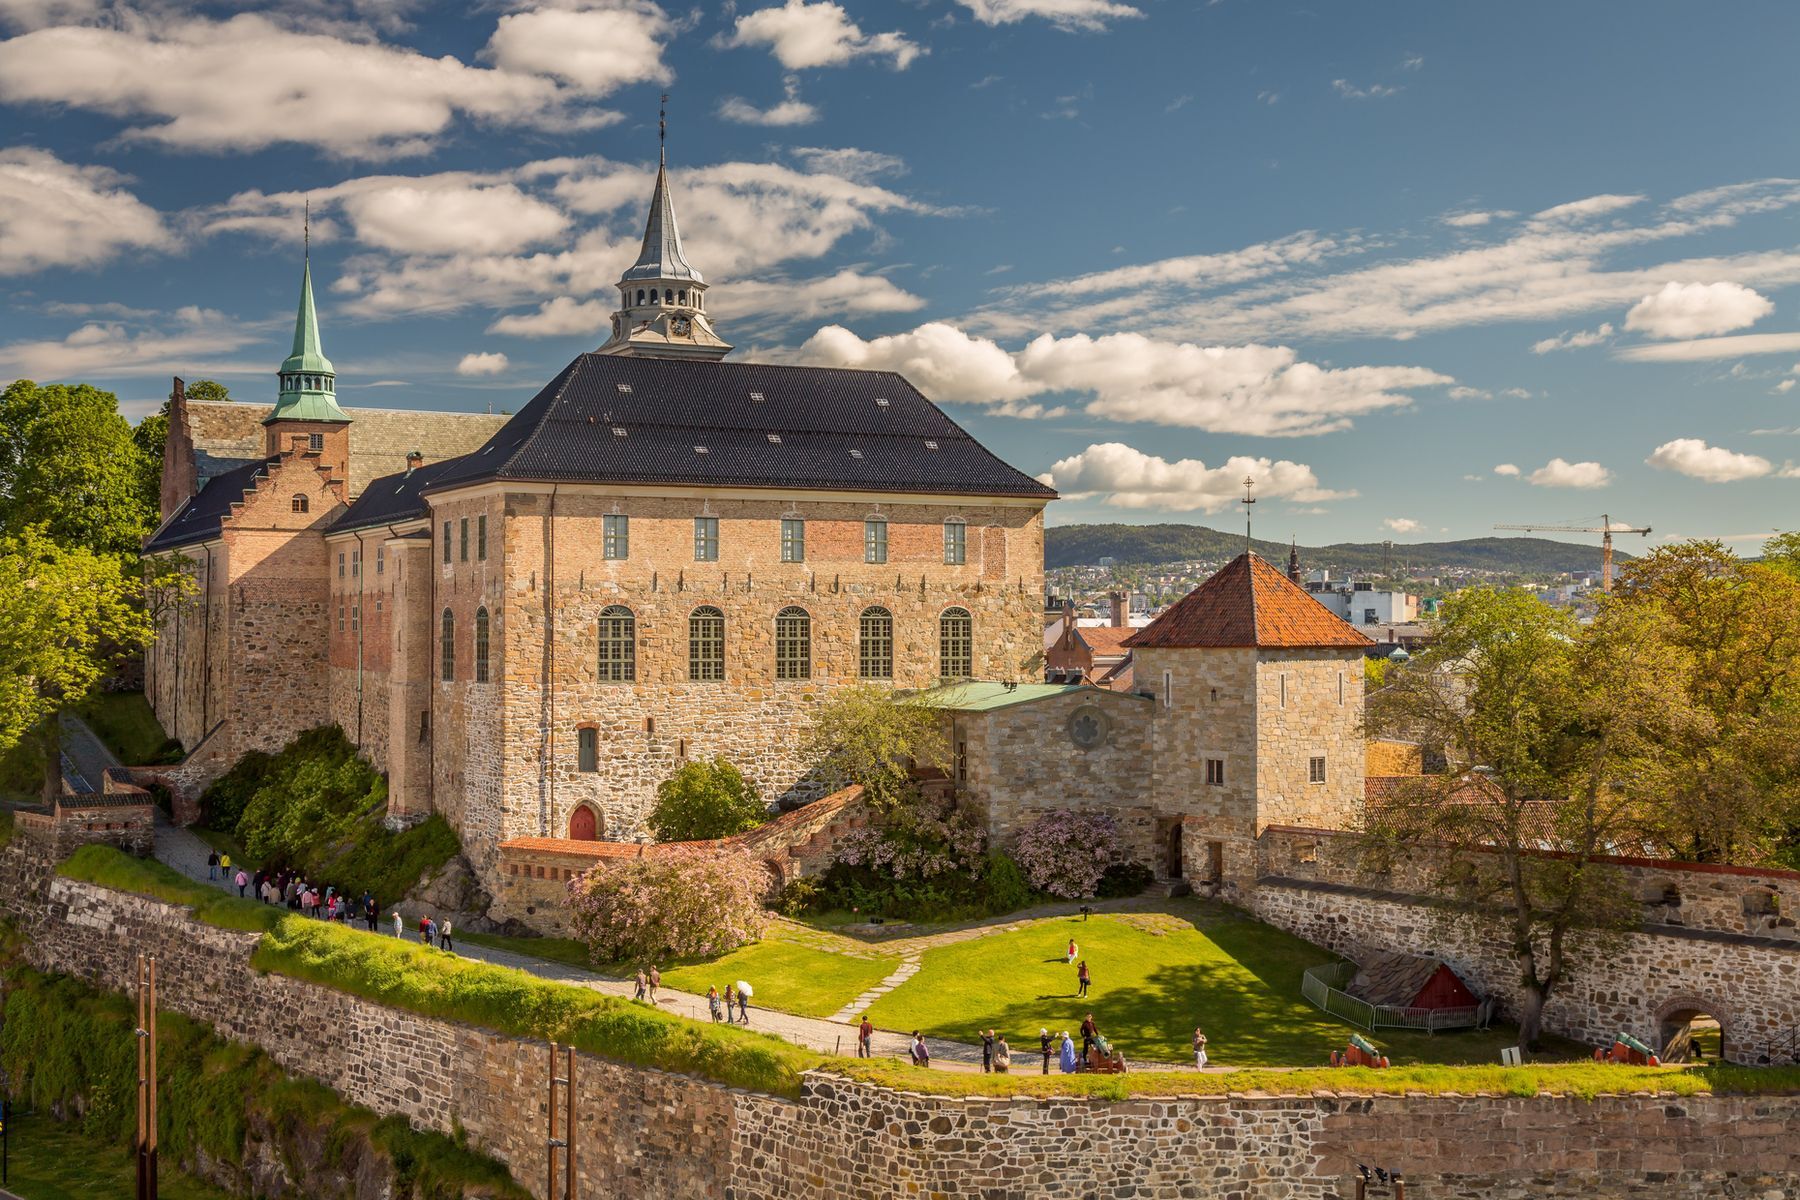 Rich in cultural attractions, <a href="https://www.visitnorway.com/places-to-go/eastern-norway/oslo/free-things-to-do/?lang=usa" rel="noreferrer noopener">Oslo,</a> Norway’s capital, abounds in interesting activities. Key sights include the <a href="https://www.visitoslo.com/en/product/?tlp=2988133&name=L-Opera--Ballet-de-Norvege" rel="noreferrer noopener">Oslo Opera House</a> for its avant-garde design, the <a href="https://www.visitoslo.com/en/product/?tlp=2978773&name=La-forteresse-d-Akershus" rel="noreferrer noopener">Akershus Fortress</a> for a glimpse into Norwegian history, and <a href="https://www.visitoslo.com/en/product/?tlp=2983043&name=Parc-de-sculptures-de-Vigeland" rel="noreferrer noopener">Vigeland Park</a> to admire amazing sculptures. Oslo’s magnificent baroque cathedral also warrants a visit during your stay. Note that the <a href="https://www.vikingtidsmuseet.no/english/" rel="noreferrer noopener">Viking Ship Museum</a> is currently being renovated and will reopen in 2026.